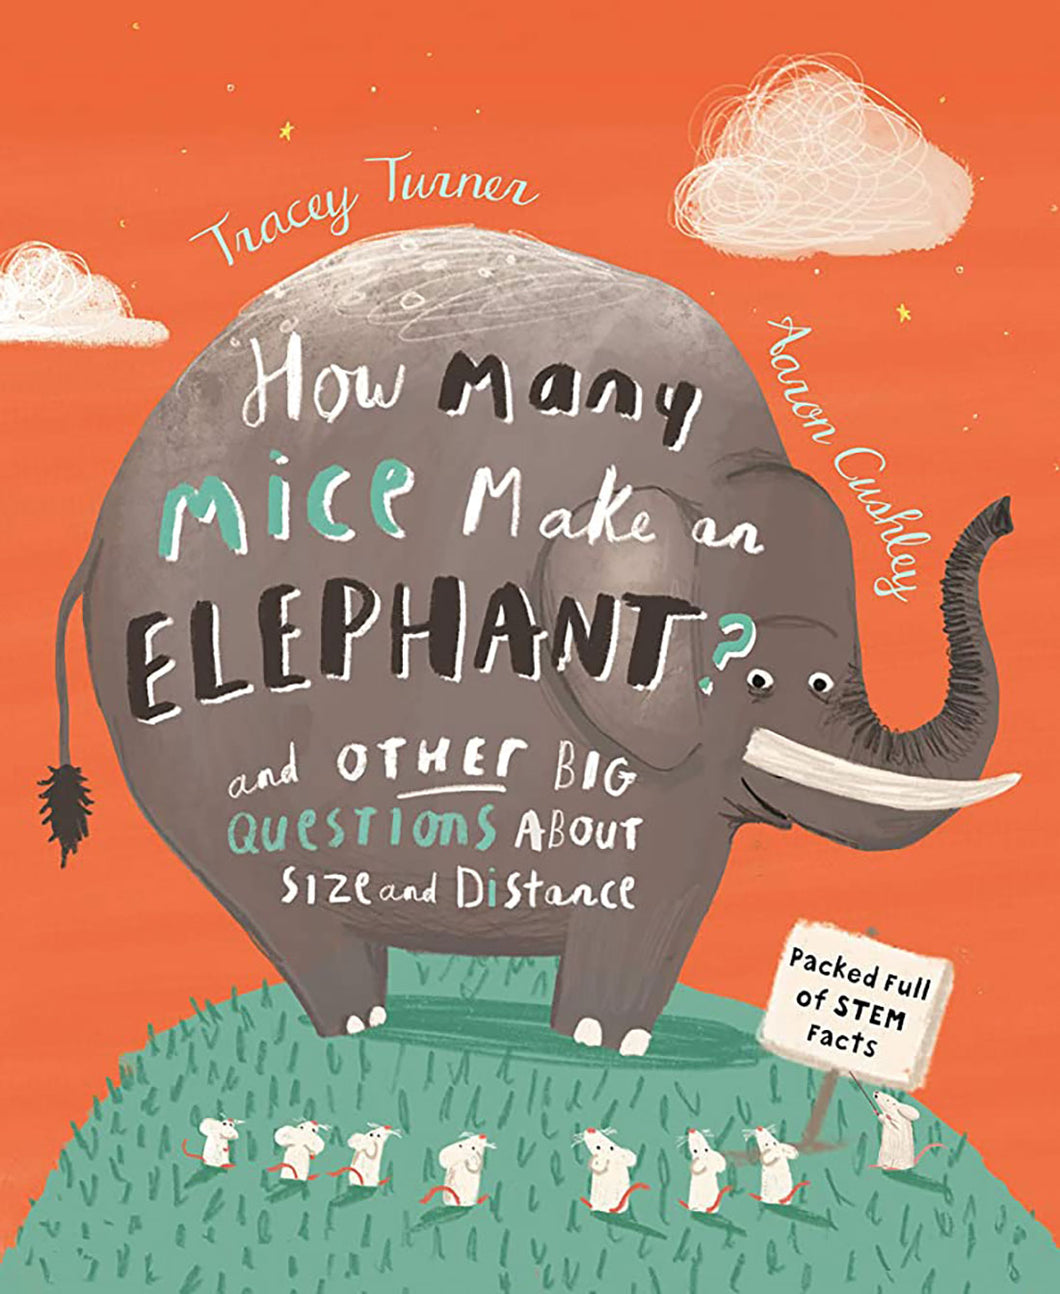 How Many Mice Make An Elephant? by Tracey Turner / Paperback - NEW BOOK